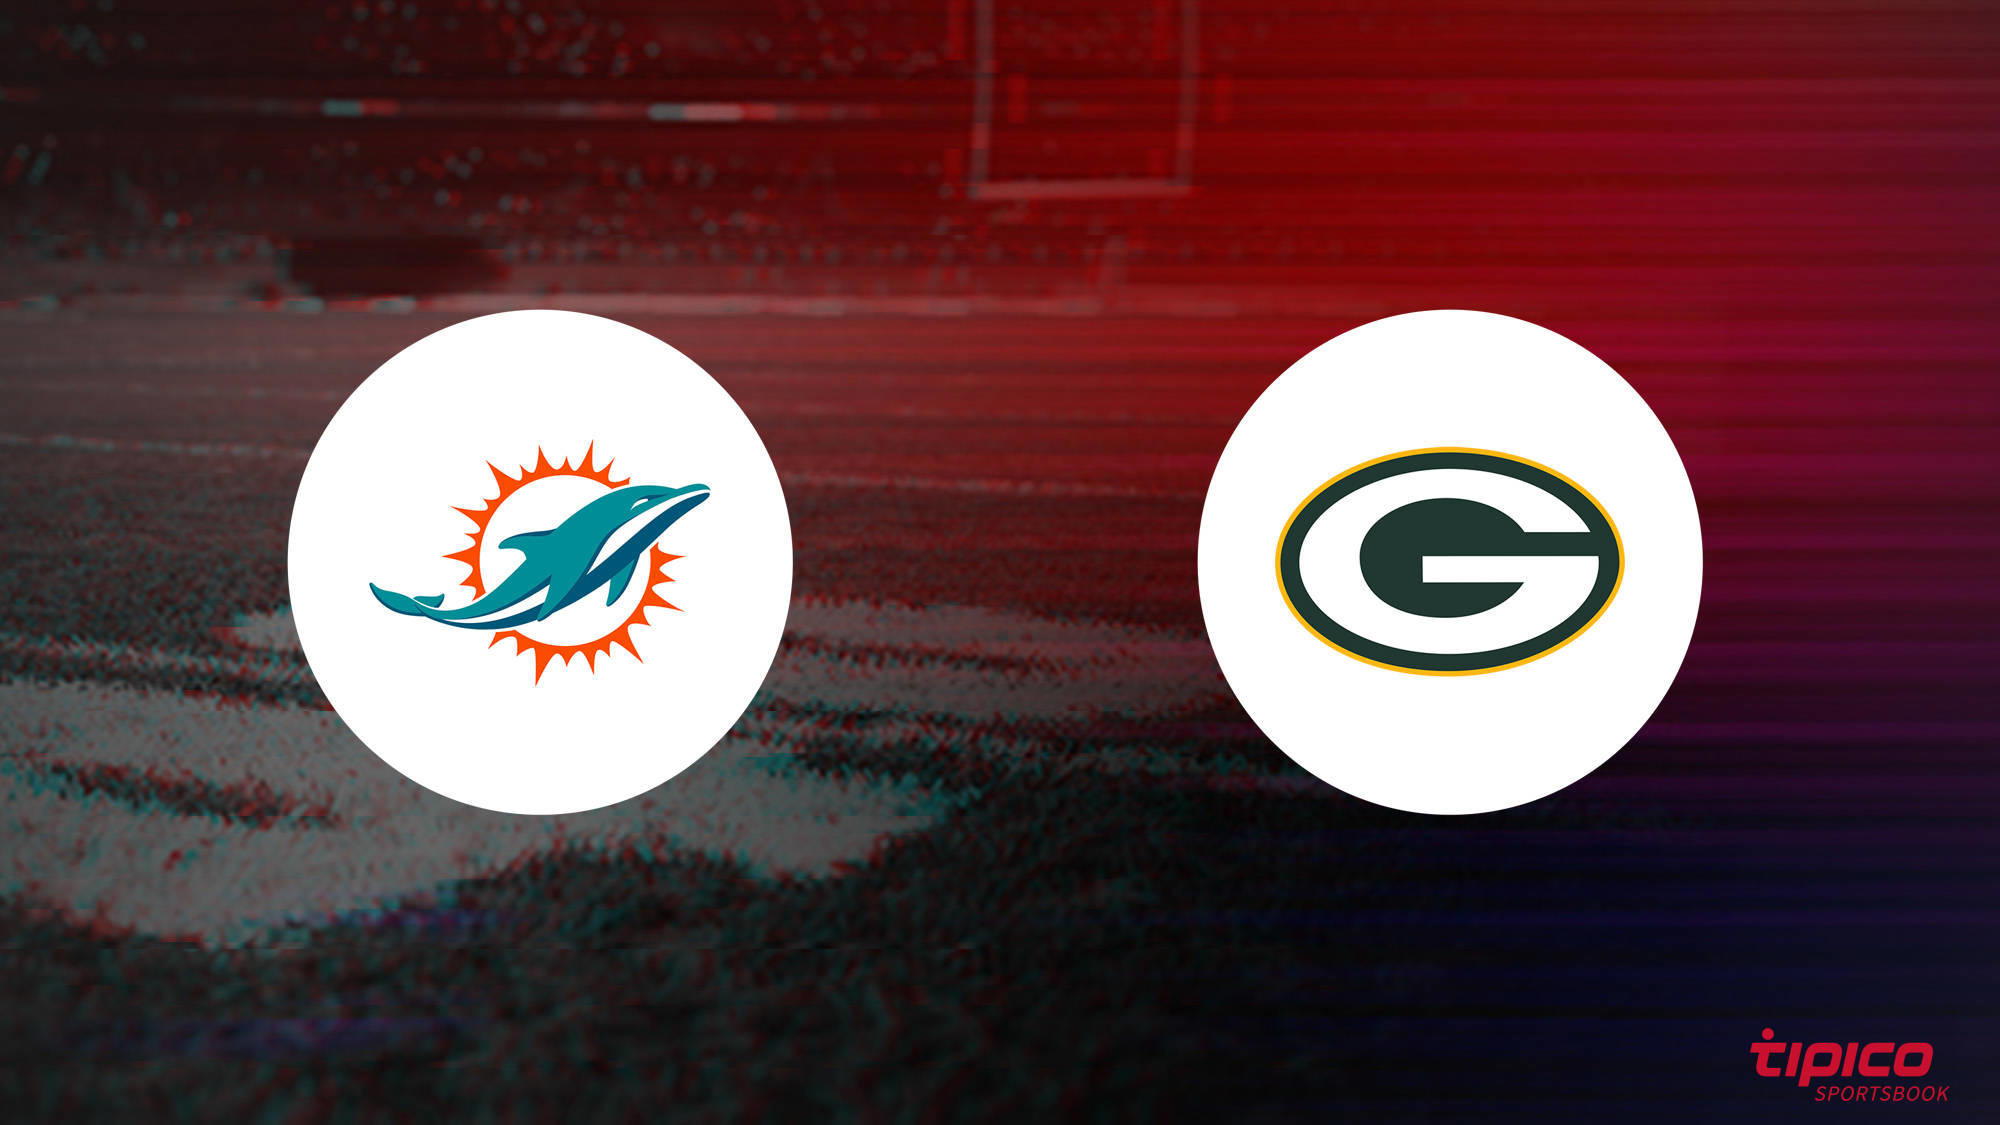 Miami Dolphins vs. Green Bay Packers Preview